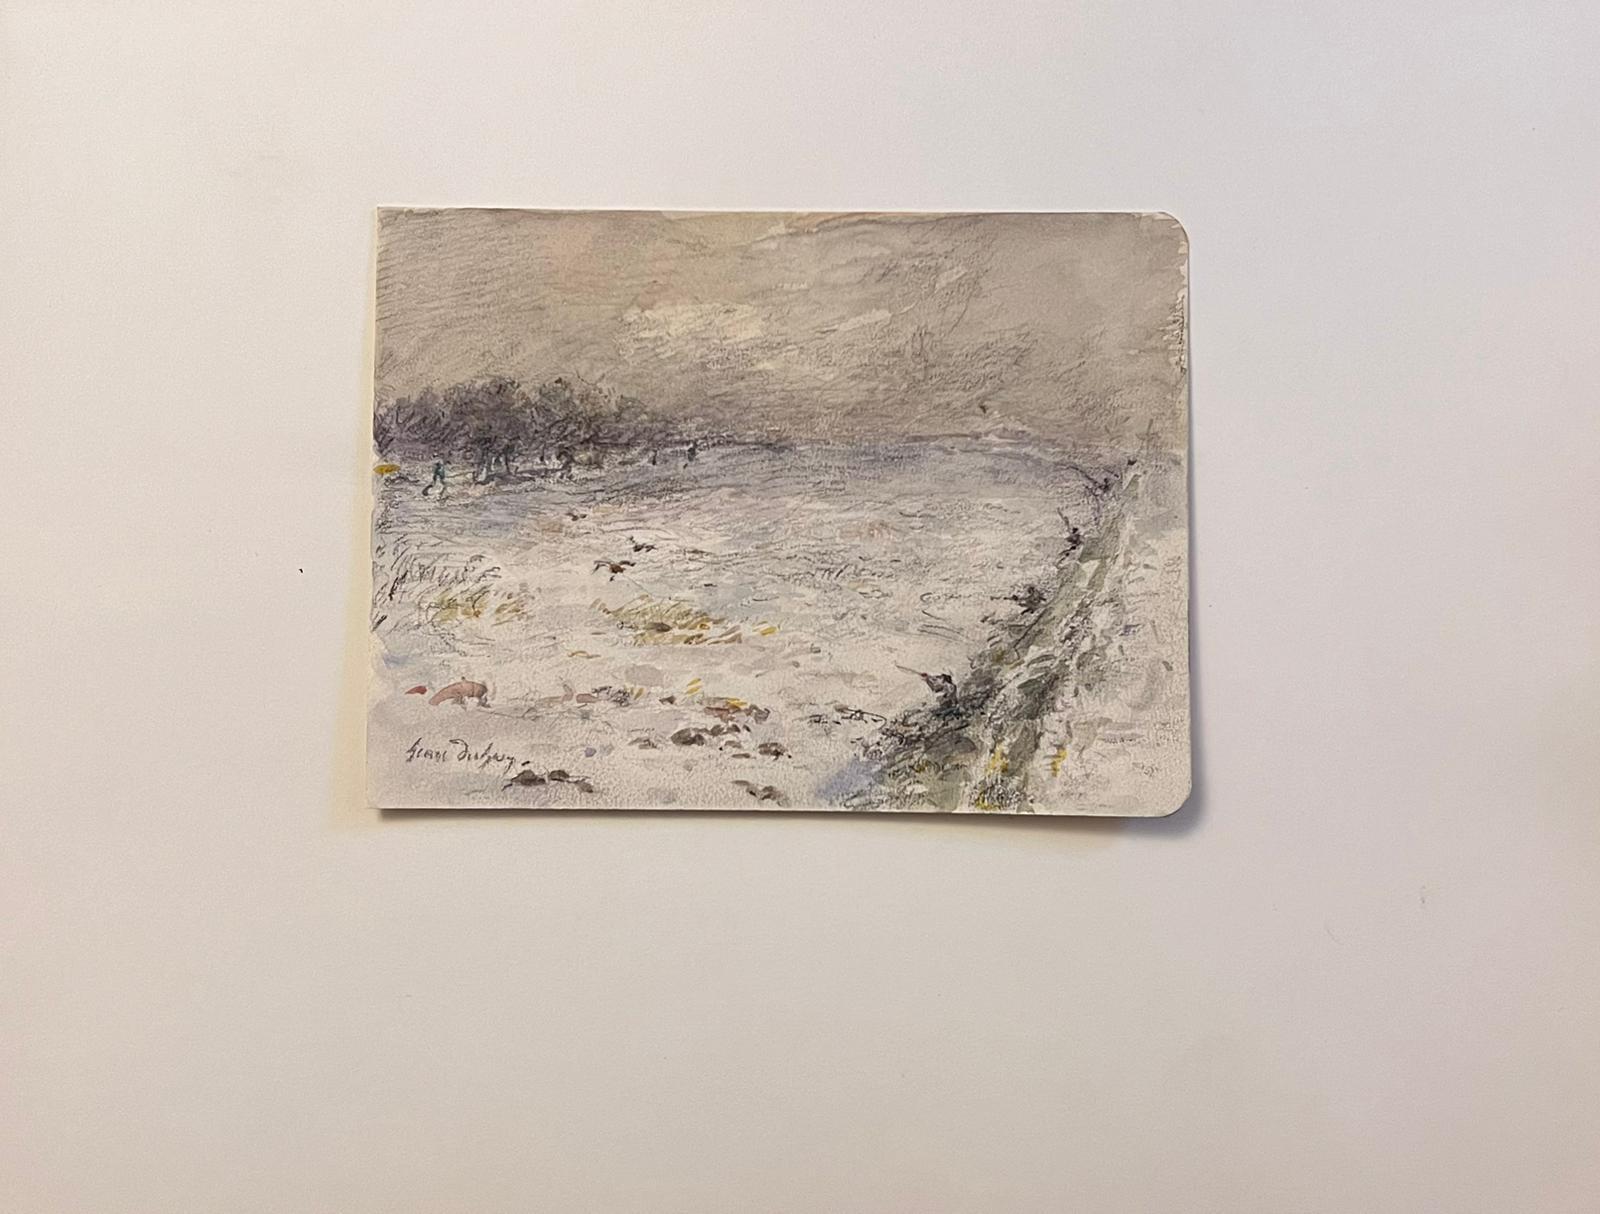 The artist: 
Henri Aime Duhem (1860-1941) French *see notes below, signed 

Title: Winter

Medium:  
gouache on paper, loosely laid over card, unframed
inscribed verso

card: 9.75 x 13 inches
painting: 5 x 7 inches, 

Provenance: 
private collection